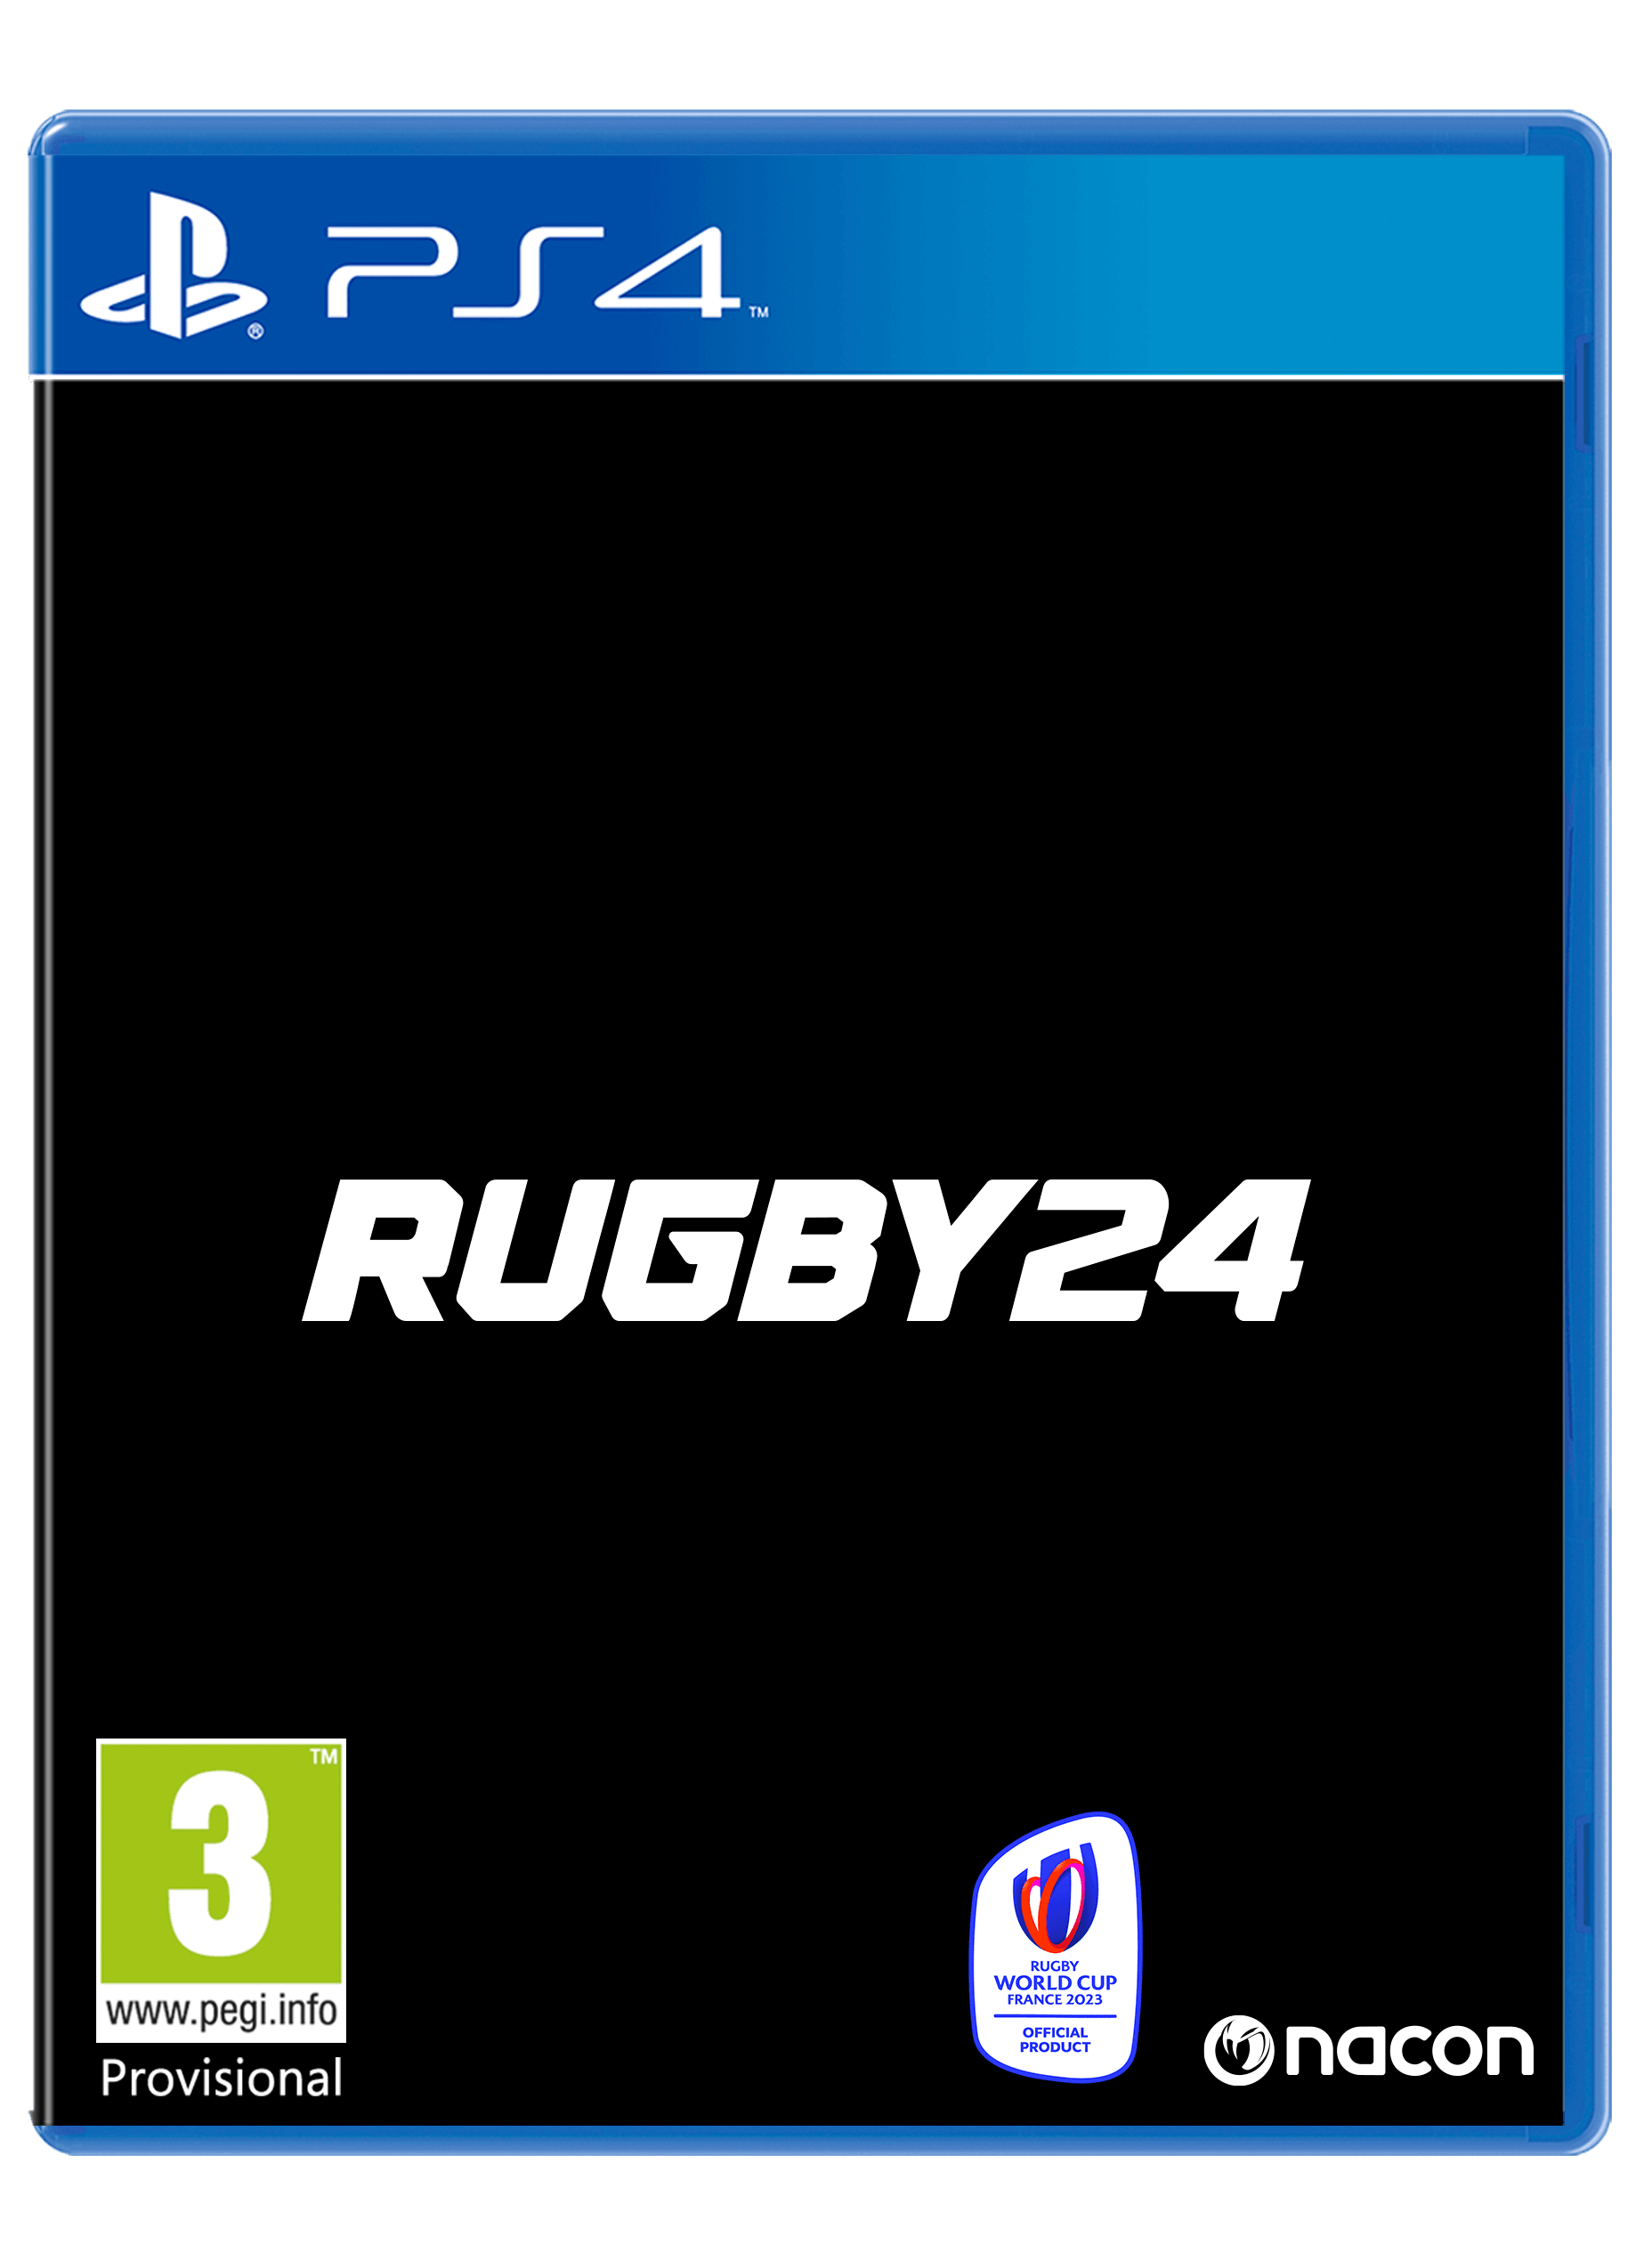 Rugby 24 - Want a New Gadget